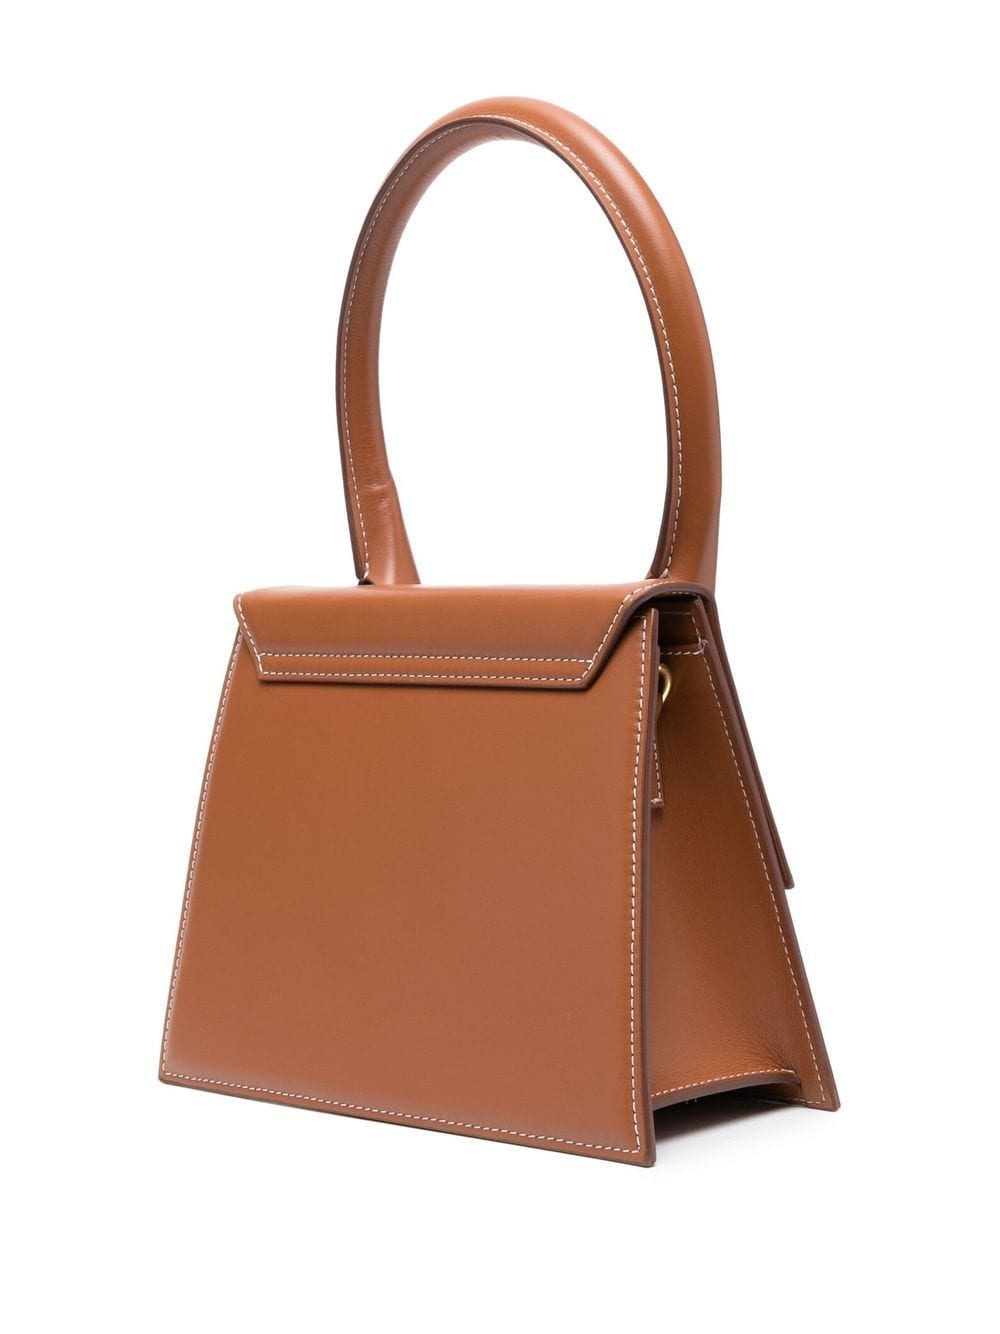 JACQUEMUS Tobacco Brown Calf Leather Handbag with Gold-Tone Logo and Single Top Handle